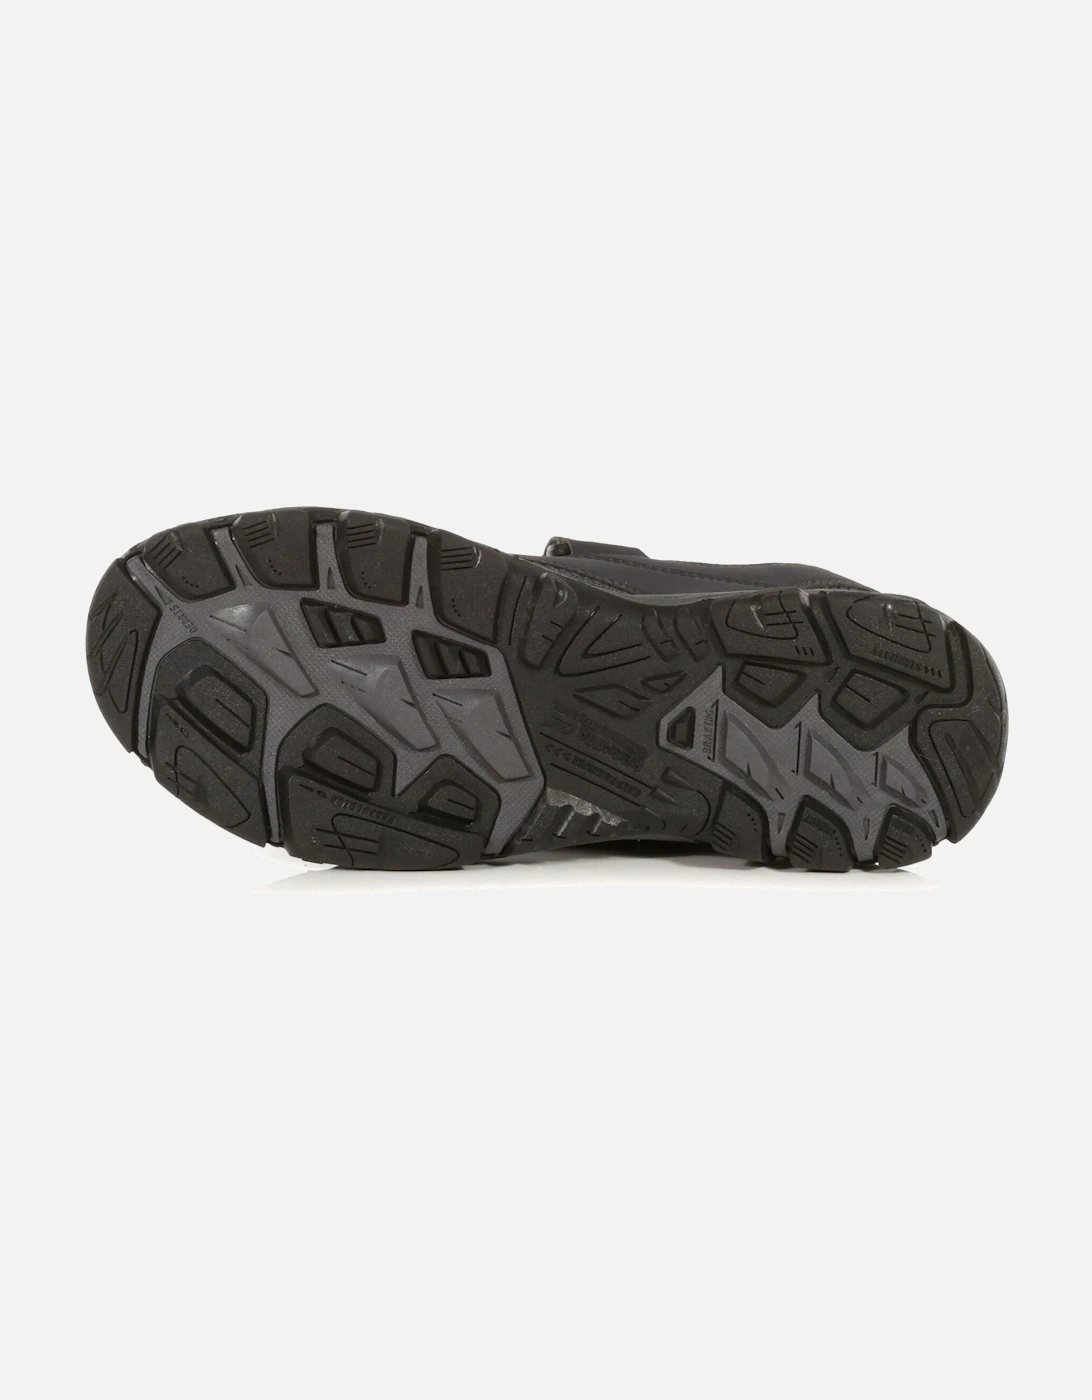 Mens Holcombe Vent Sandals